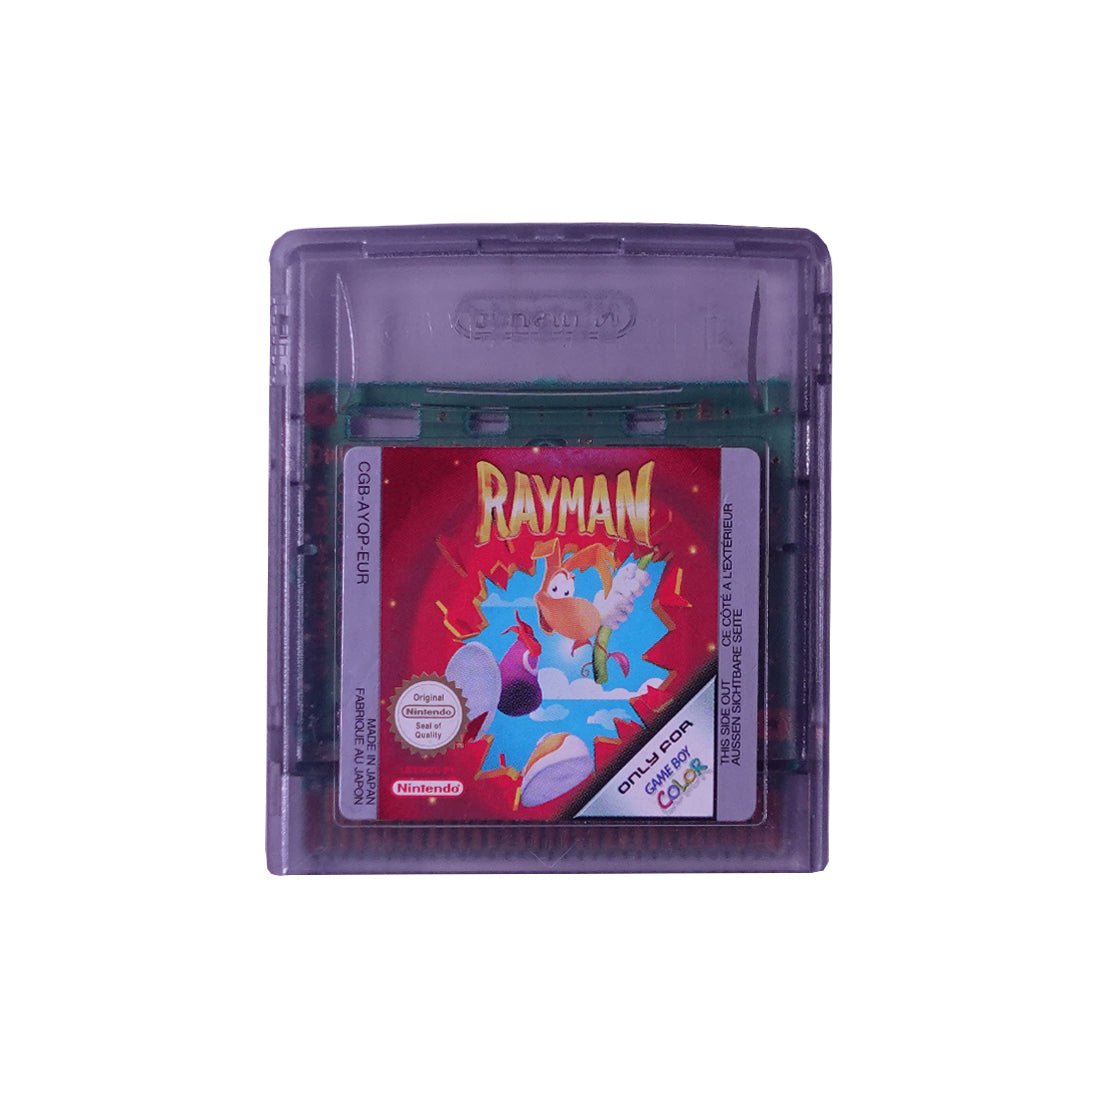 (Pre-Owned) Rayman - Gameboy Color - ريترو - Store 974 | ستور ٩٧٤